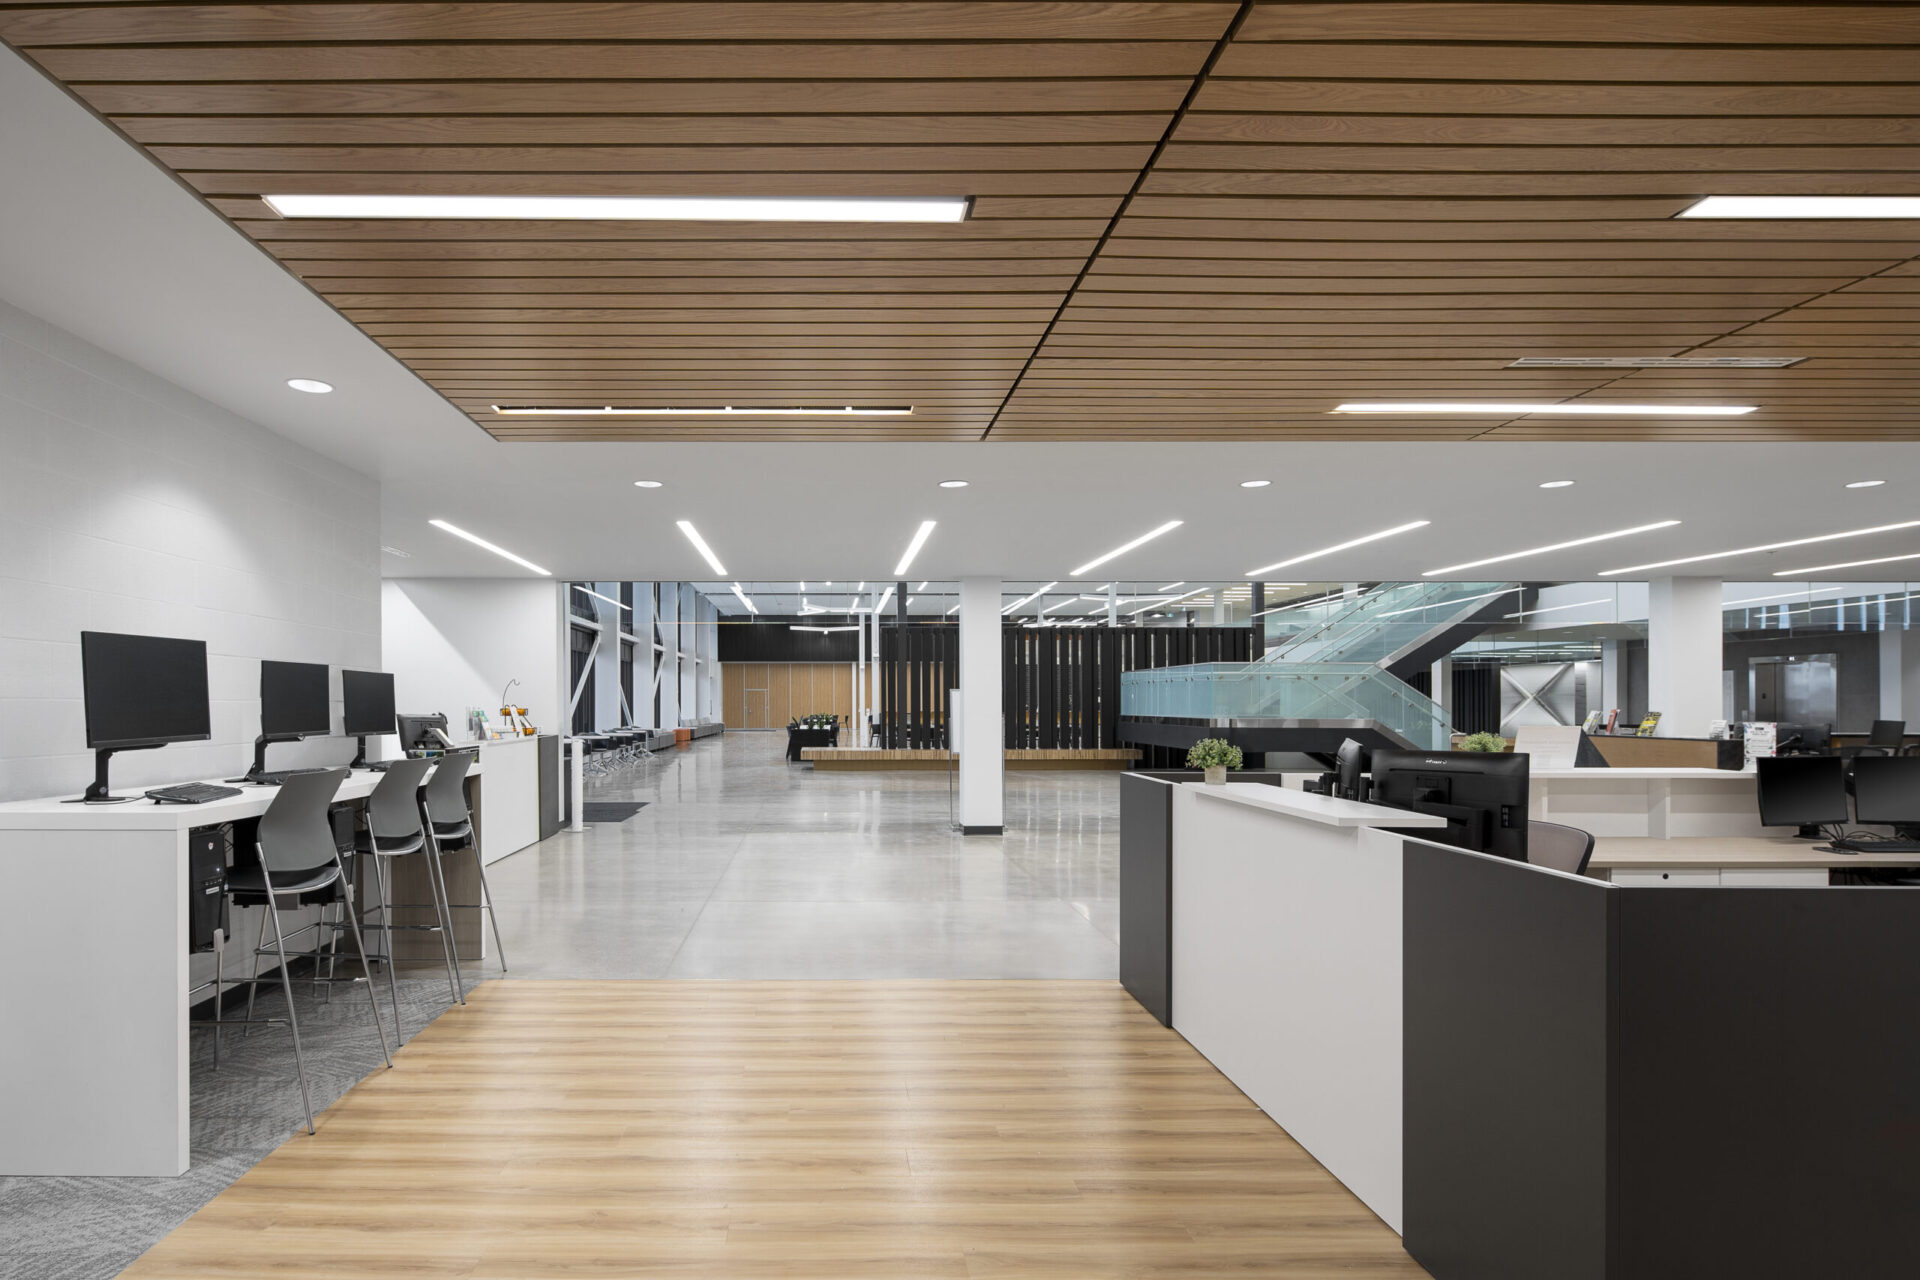 A modern office building with wooden ceilings and desks.